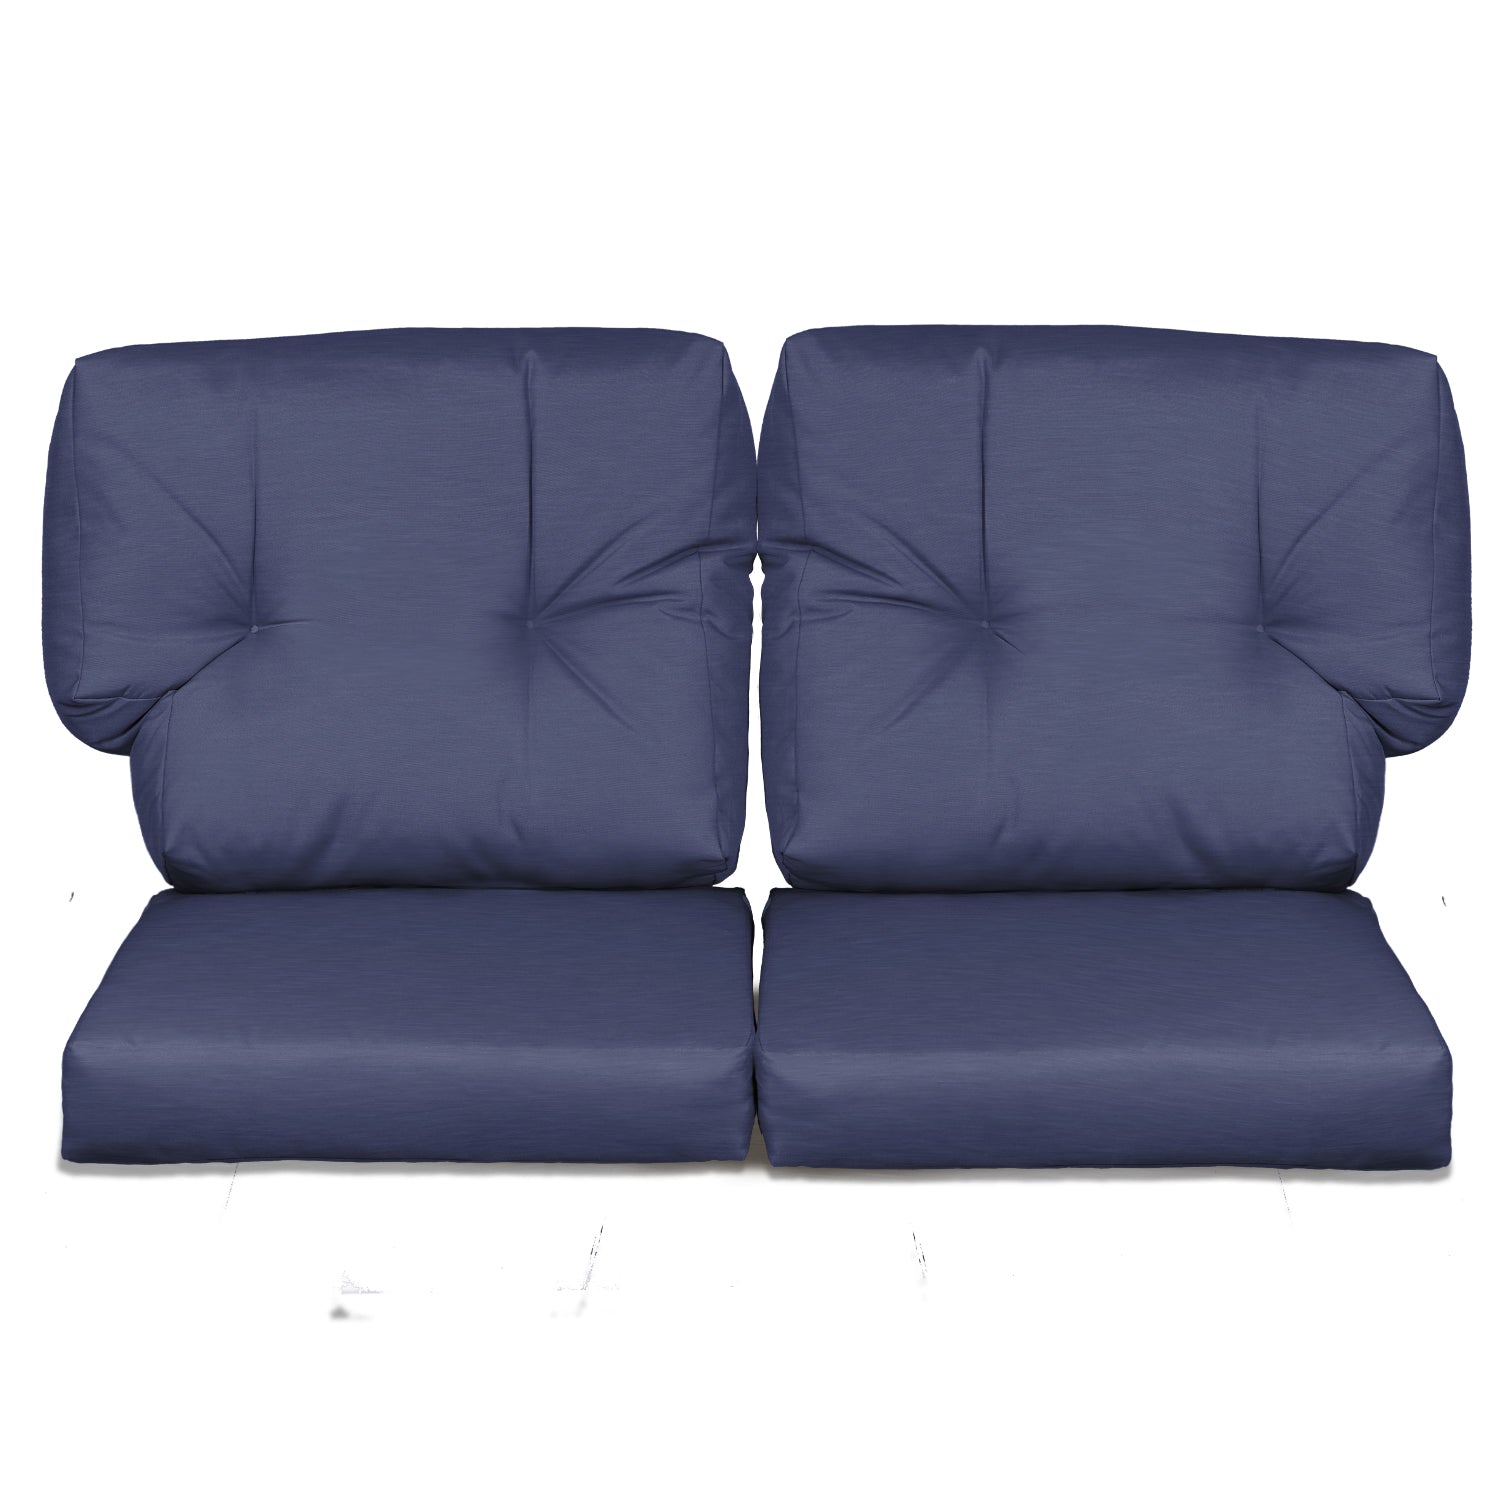 https://aoodorshop.com/cdn/shop/products/deep-seating-loveseat-cushion-set-high-quality-olefin-fabric-breathable-and-supportive-ideal-for-patio-sectional-sofa-set-of-2-2-back-2-seater-382843.jpg?v=1703660540